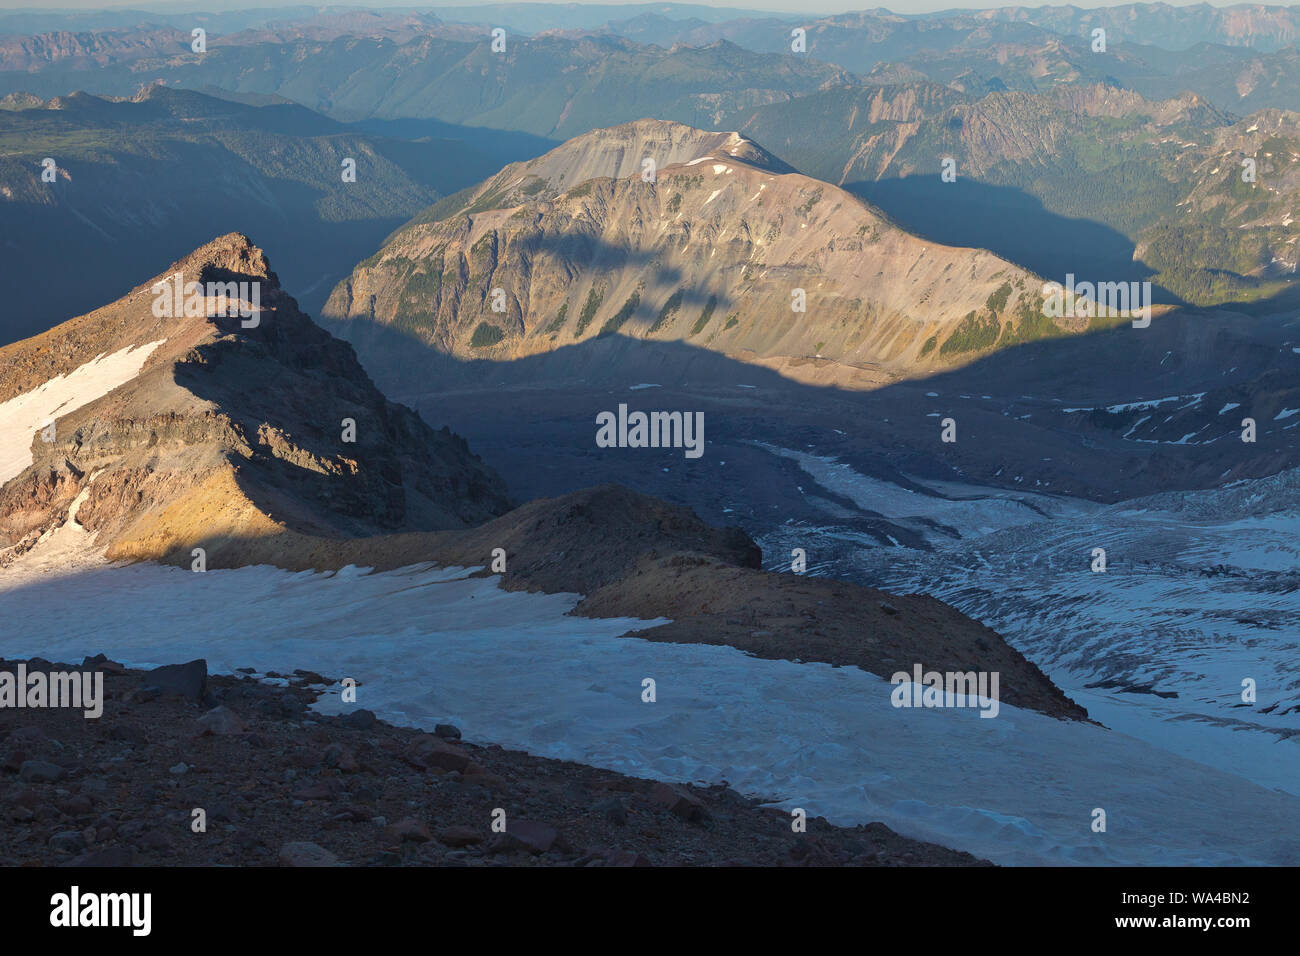 Emmons Glacier and Goat Island Mountain from Camp Curtis, Mount Rainier National Park Stock Photo